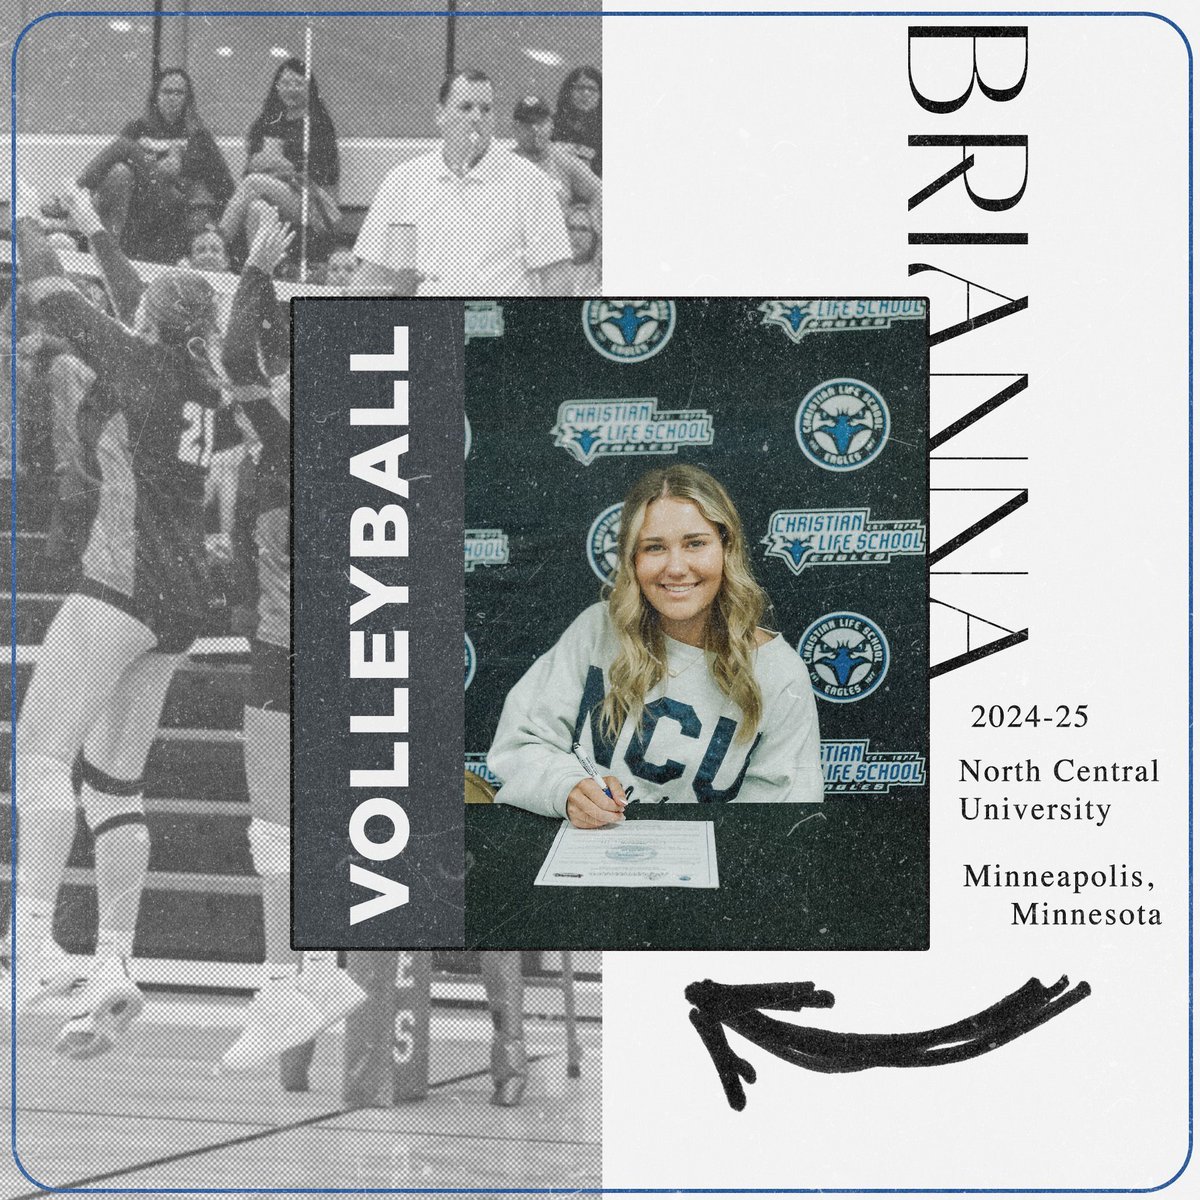 Senior Brianna Brown has signed to play volleyball at North Central University in Minneapolis next season. Bri is a valued member of the CLS student body, serving as a varsity volleyball player, student leader, and worship leader during chapel times.